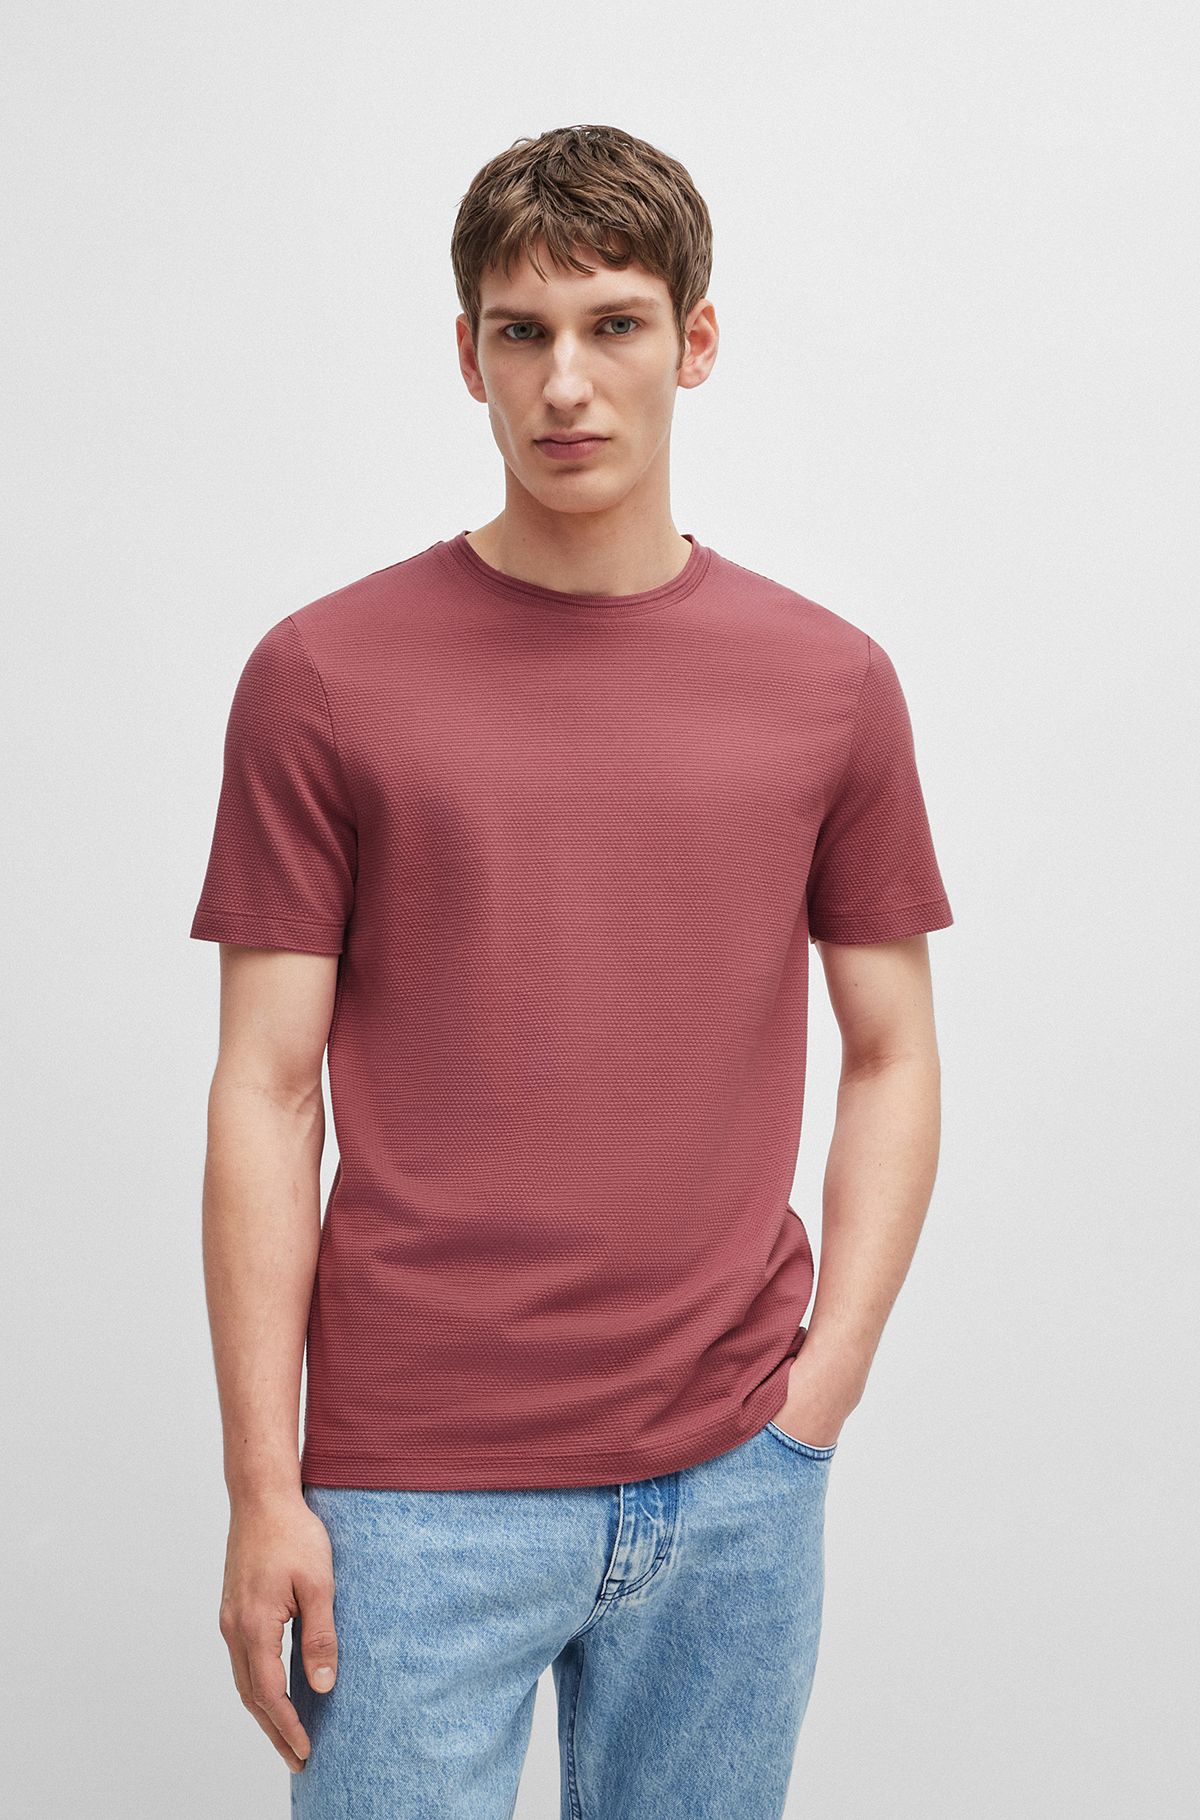 Cotton-blend T-shirt with bubble-jacquard structure, Red